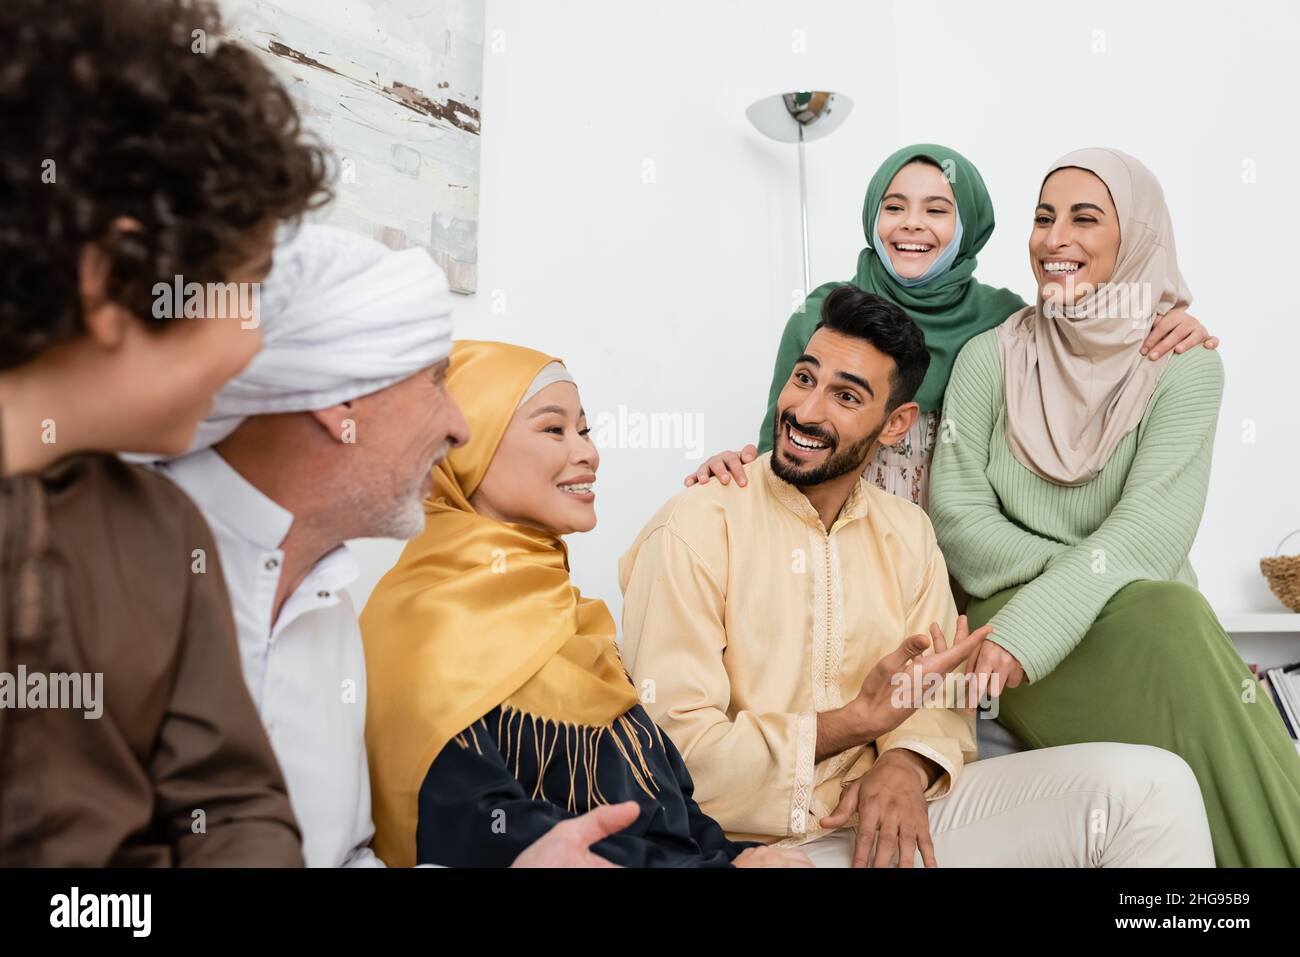 smiling arabian man pointing with hand while talking to cheerful multiethnic muslim family Stock Photo